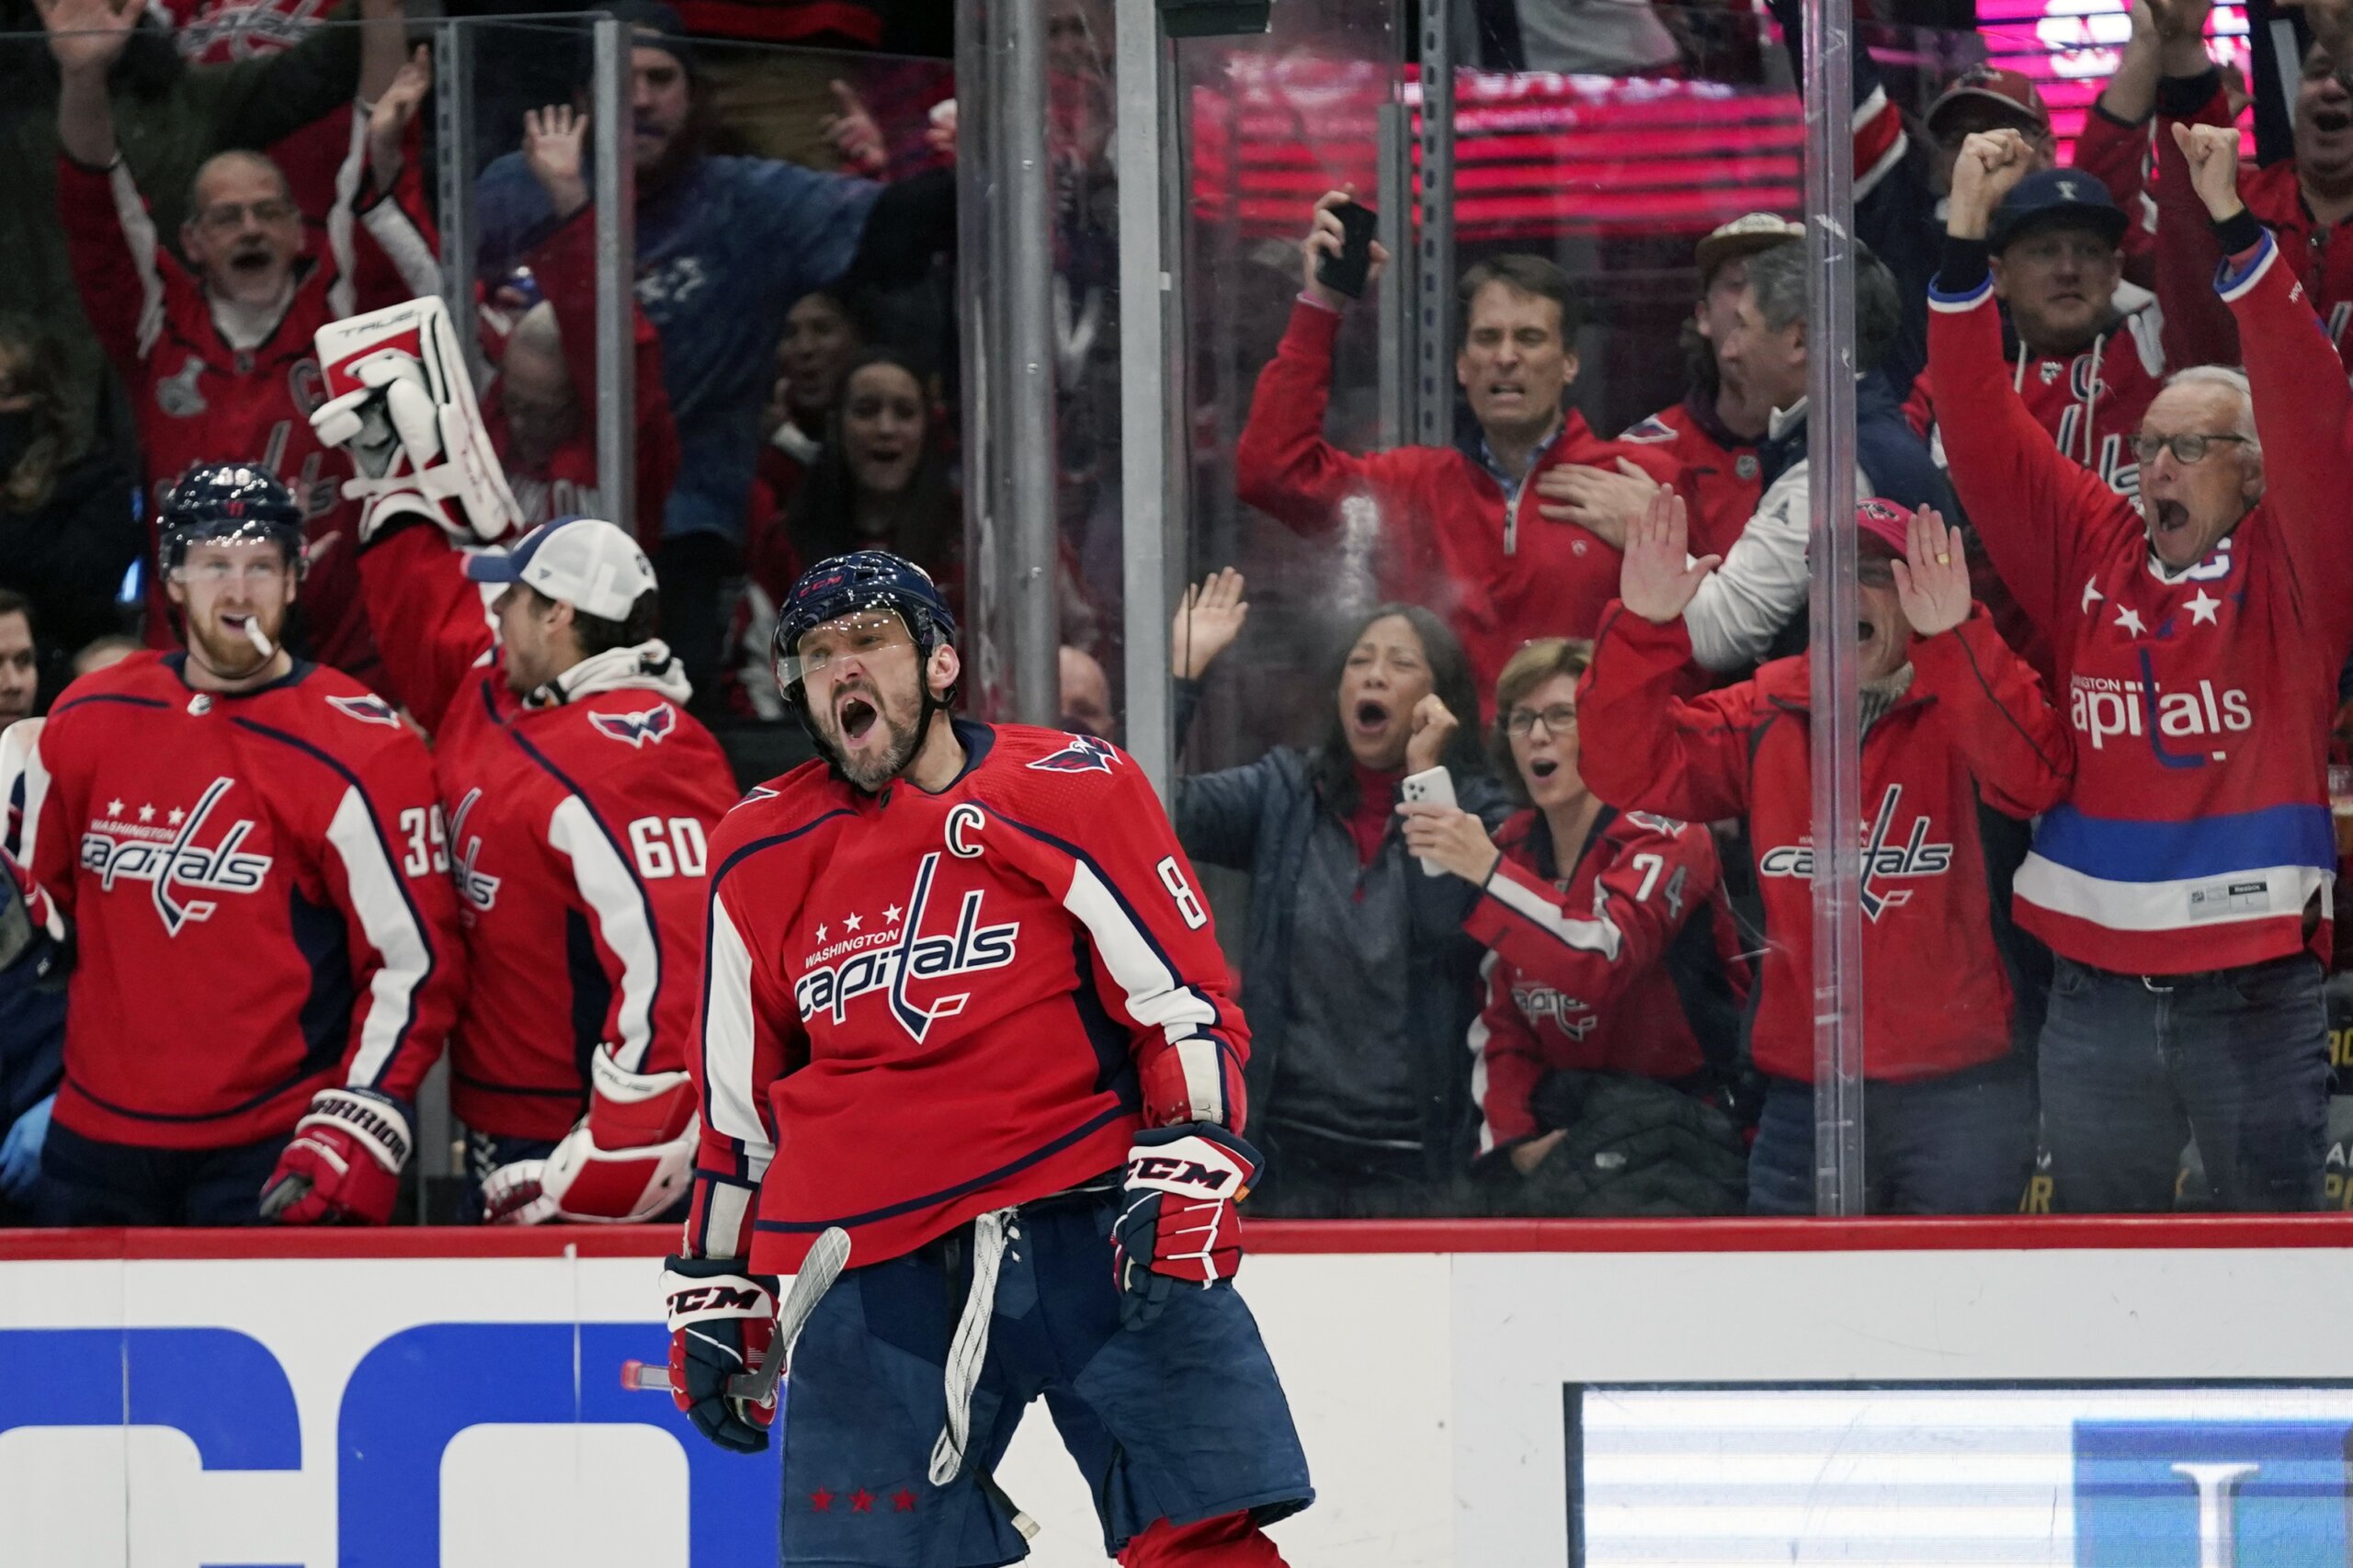 Hurricanes top Capitals 4-1 in Carolina's 1st outdoor game - The